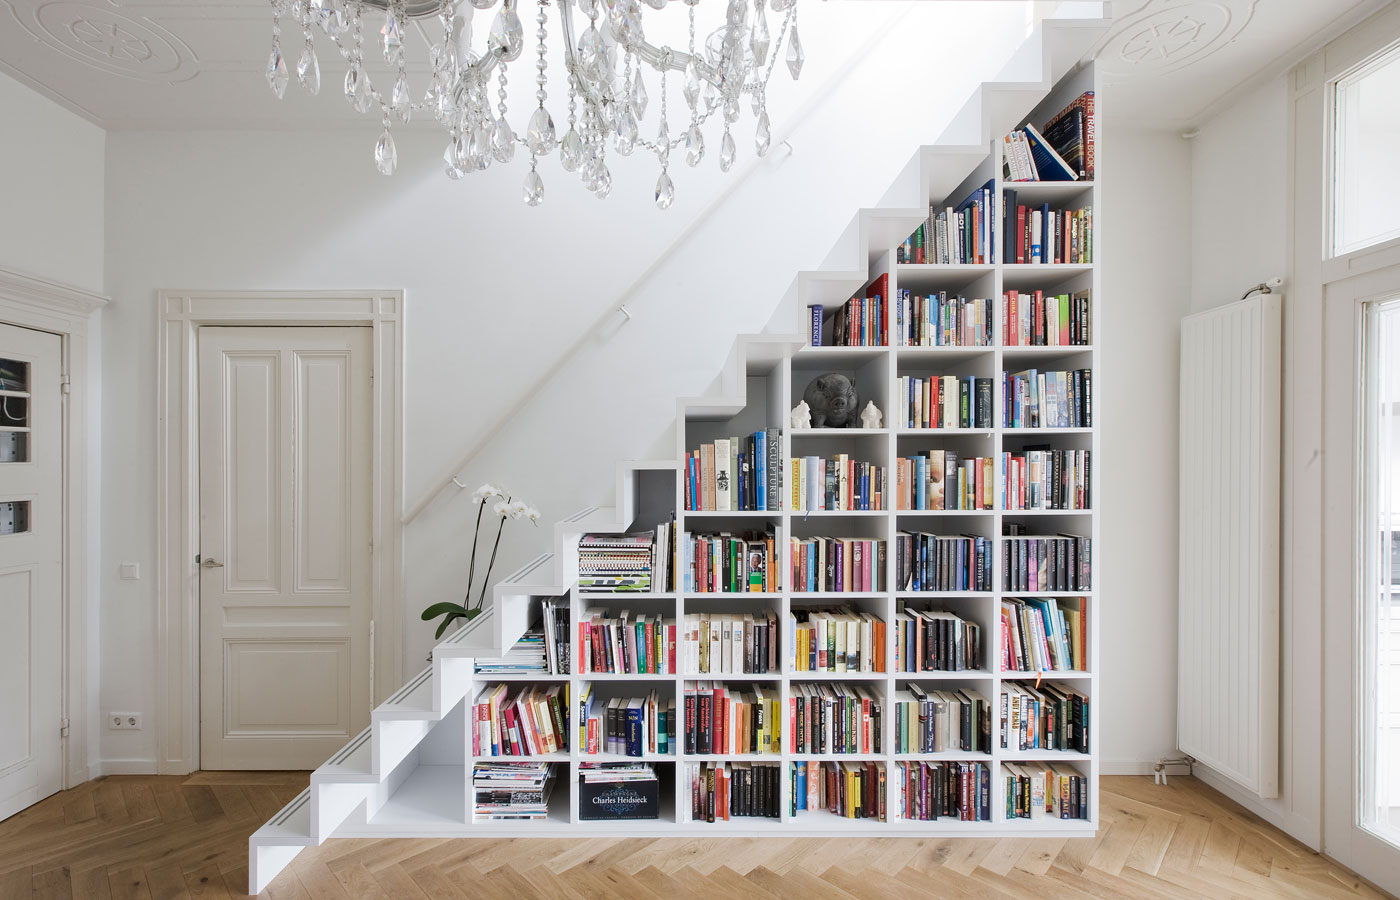 7 Creative Ways to Fit More Books in a Small Space